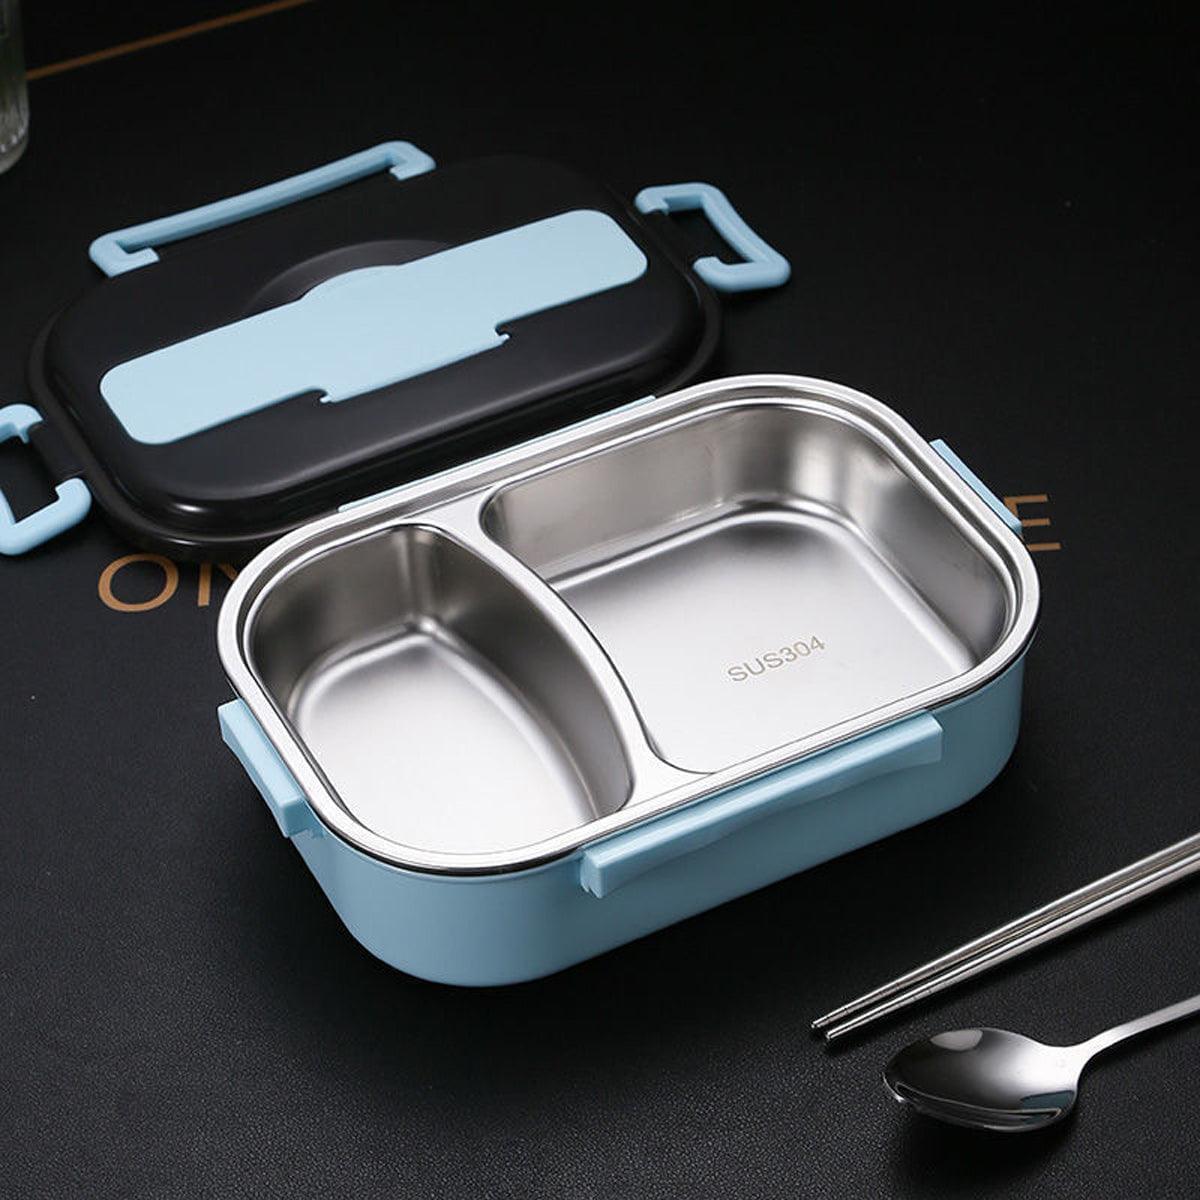 Bento Stainless Steel Lunch Box for Kids 2 Compartments